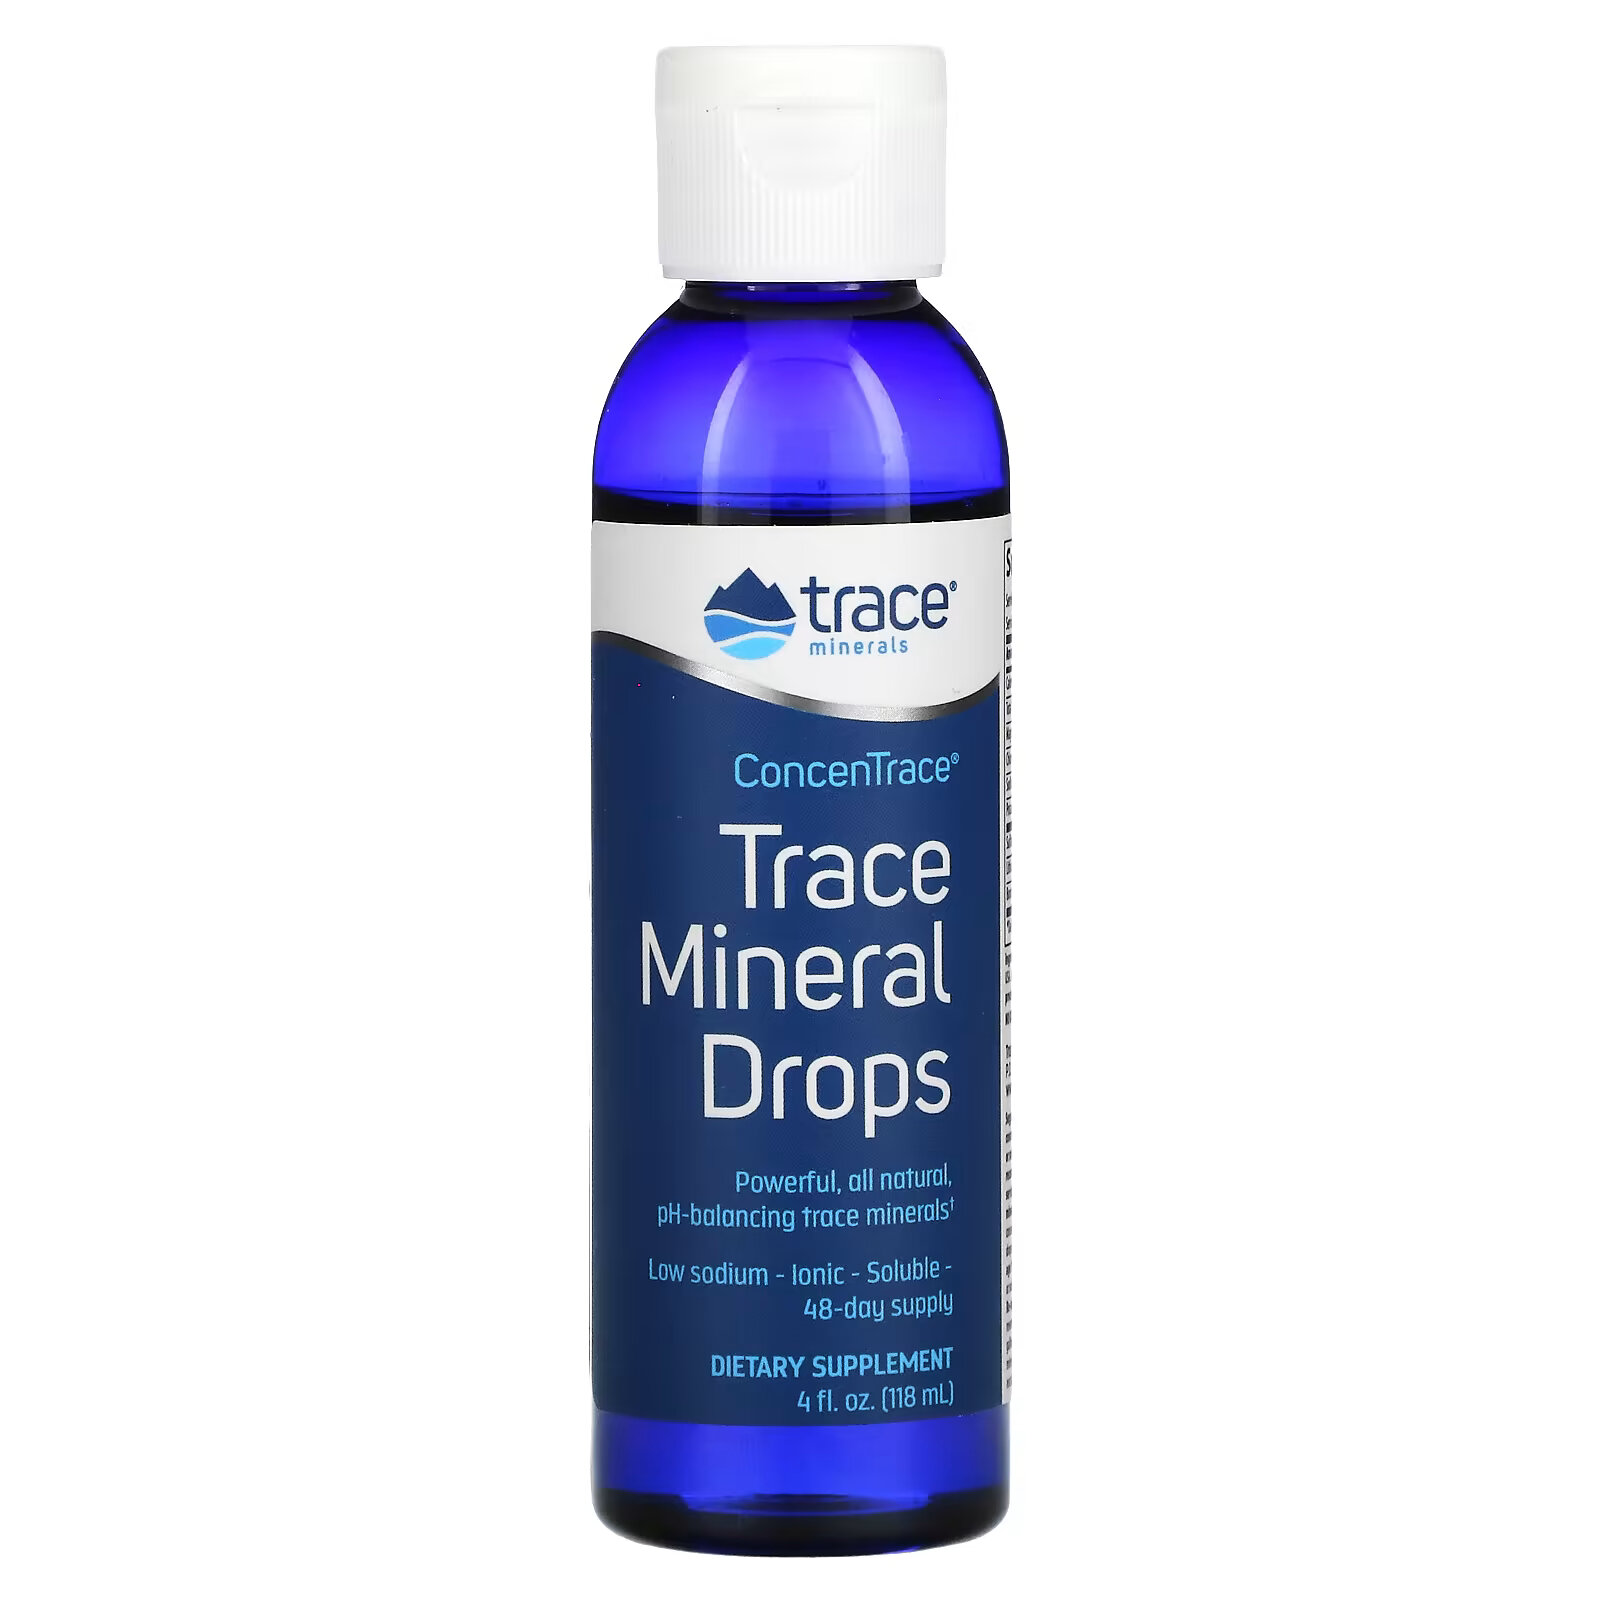 Trace Minerals ConcenTrace, капли с микроэлементами, 118 мл trace minerals research concentrace капли с микроэлементами 118 мл